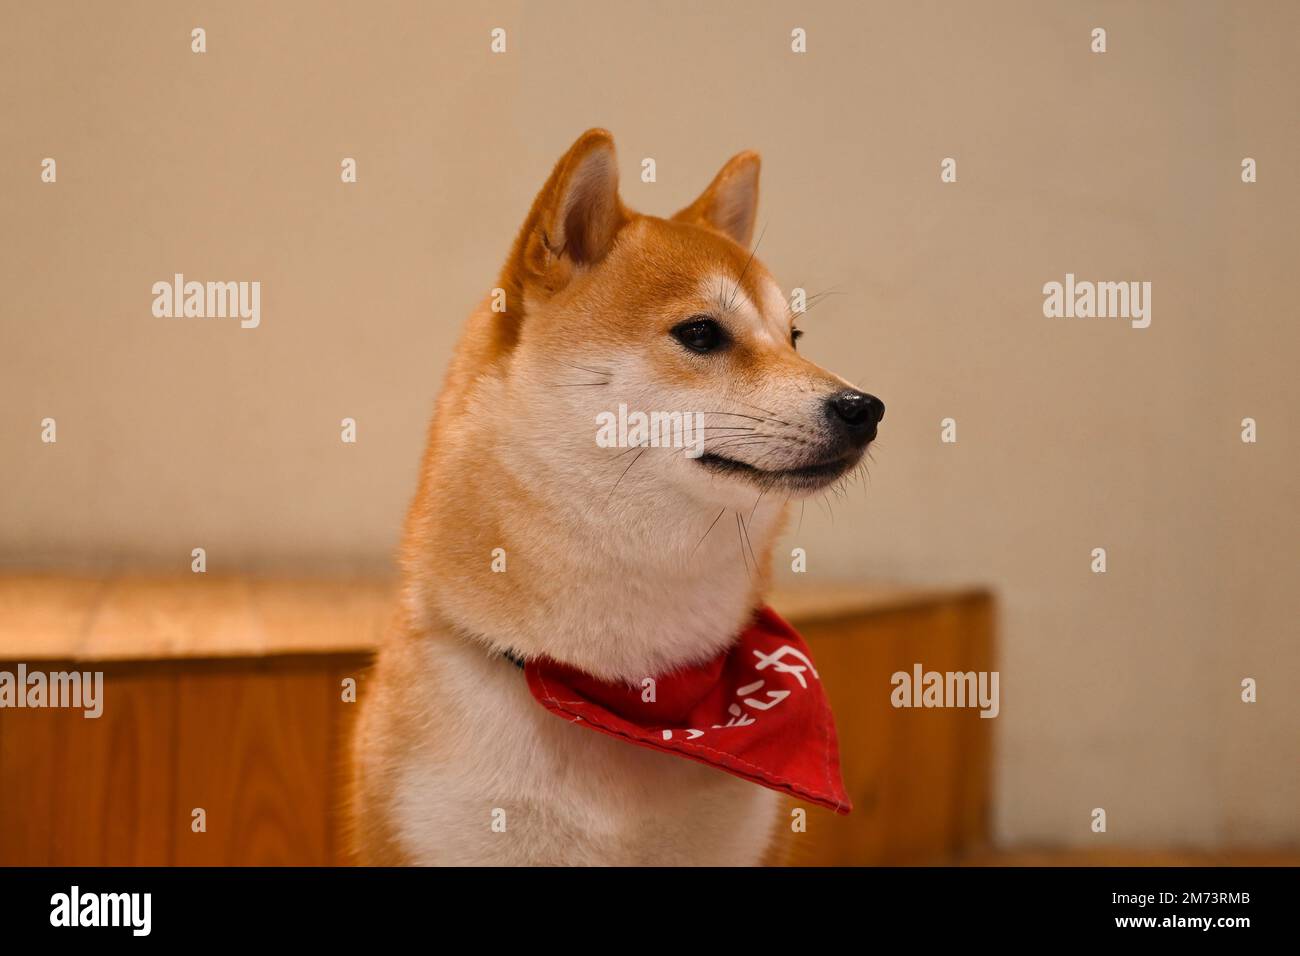 The portrait of adorable Shiba Inu dog with red bandana around the neck Stock Photo